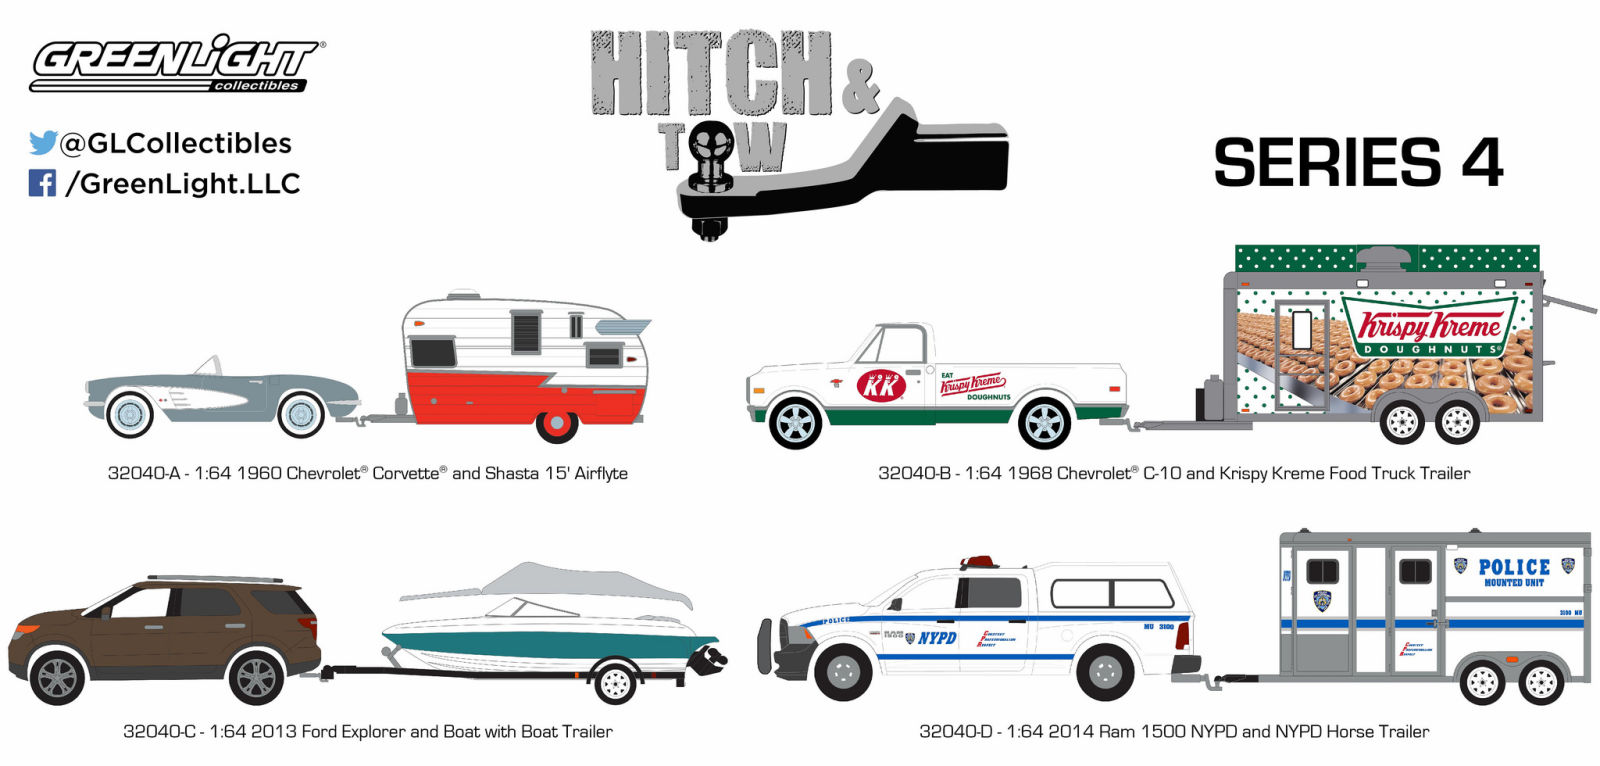 Illustration for article titled Greenlight: Choose the Next Hitch  Tow!